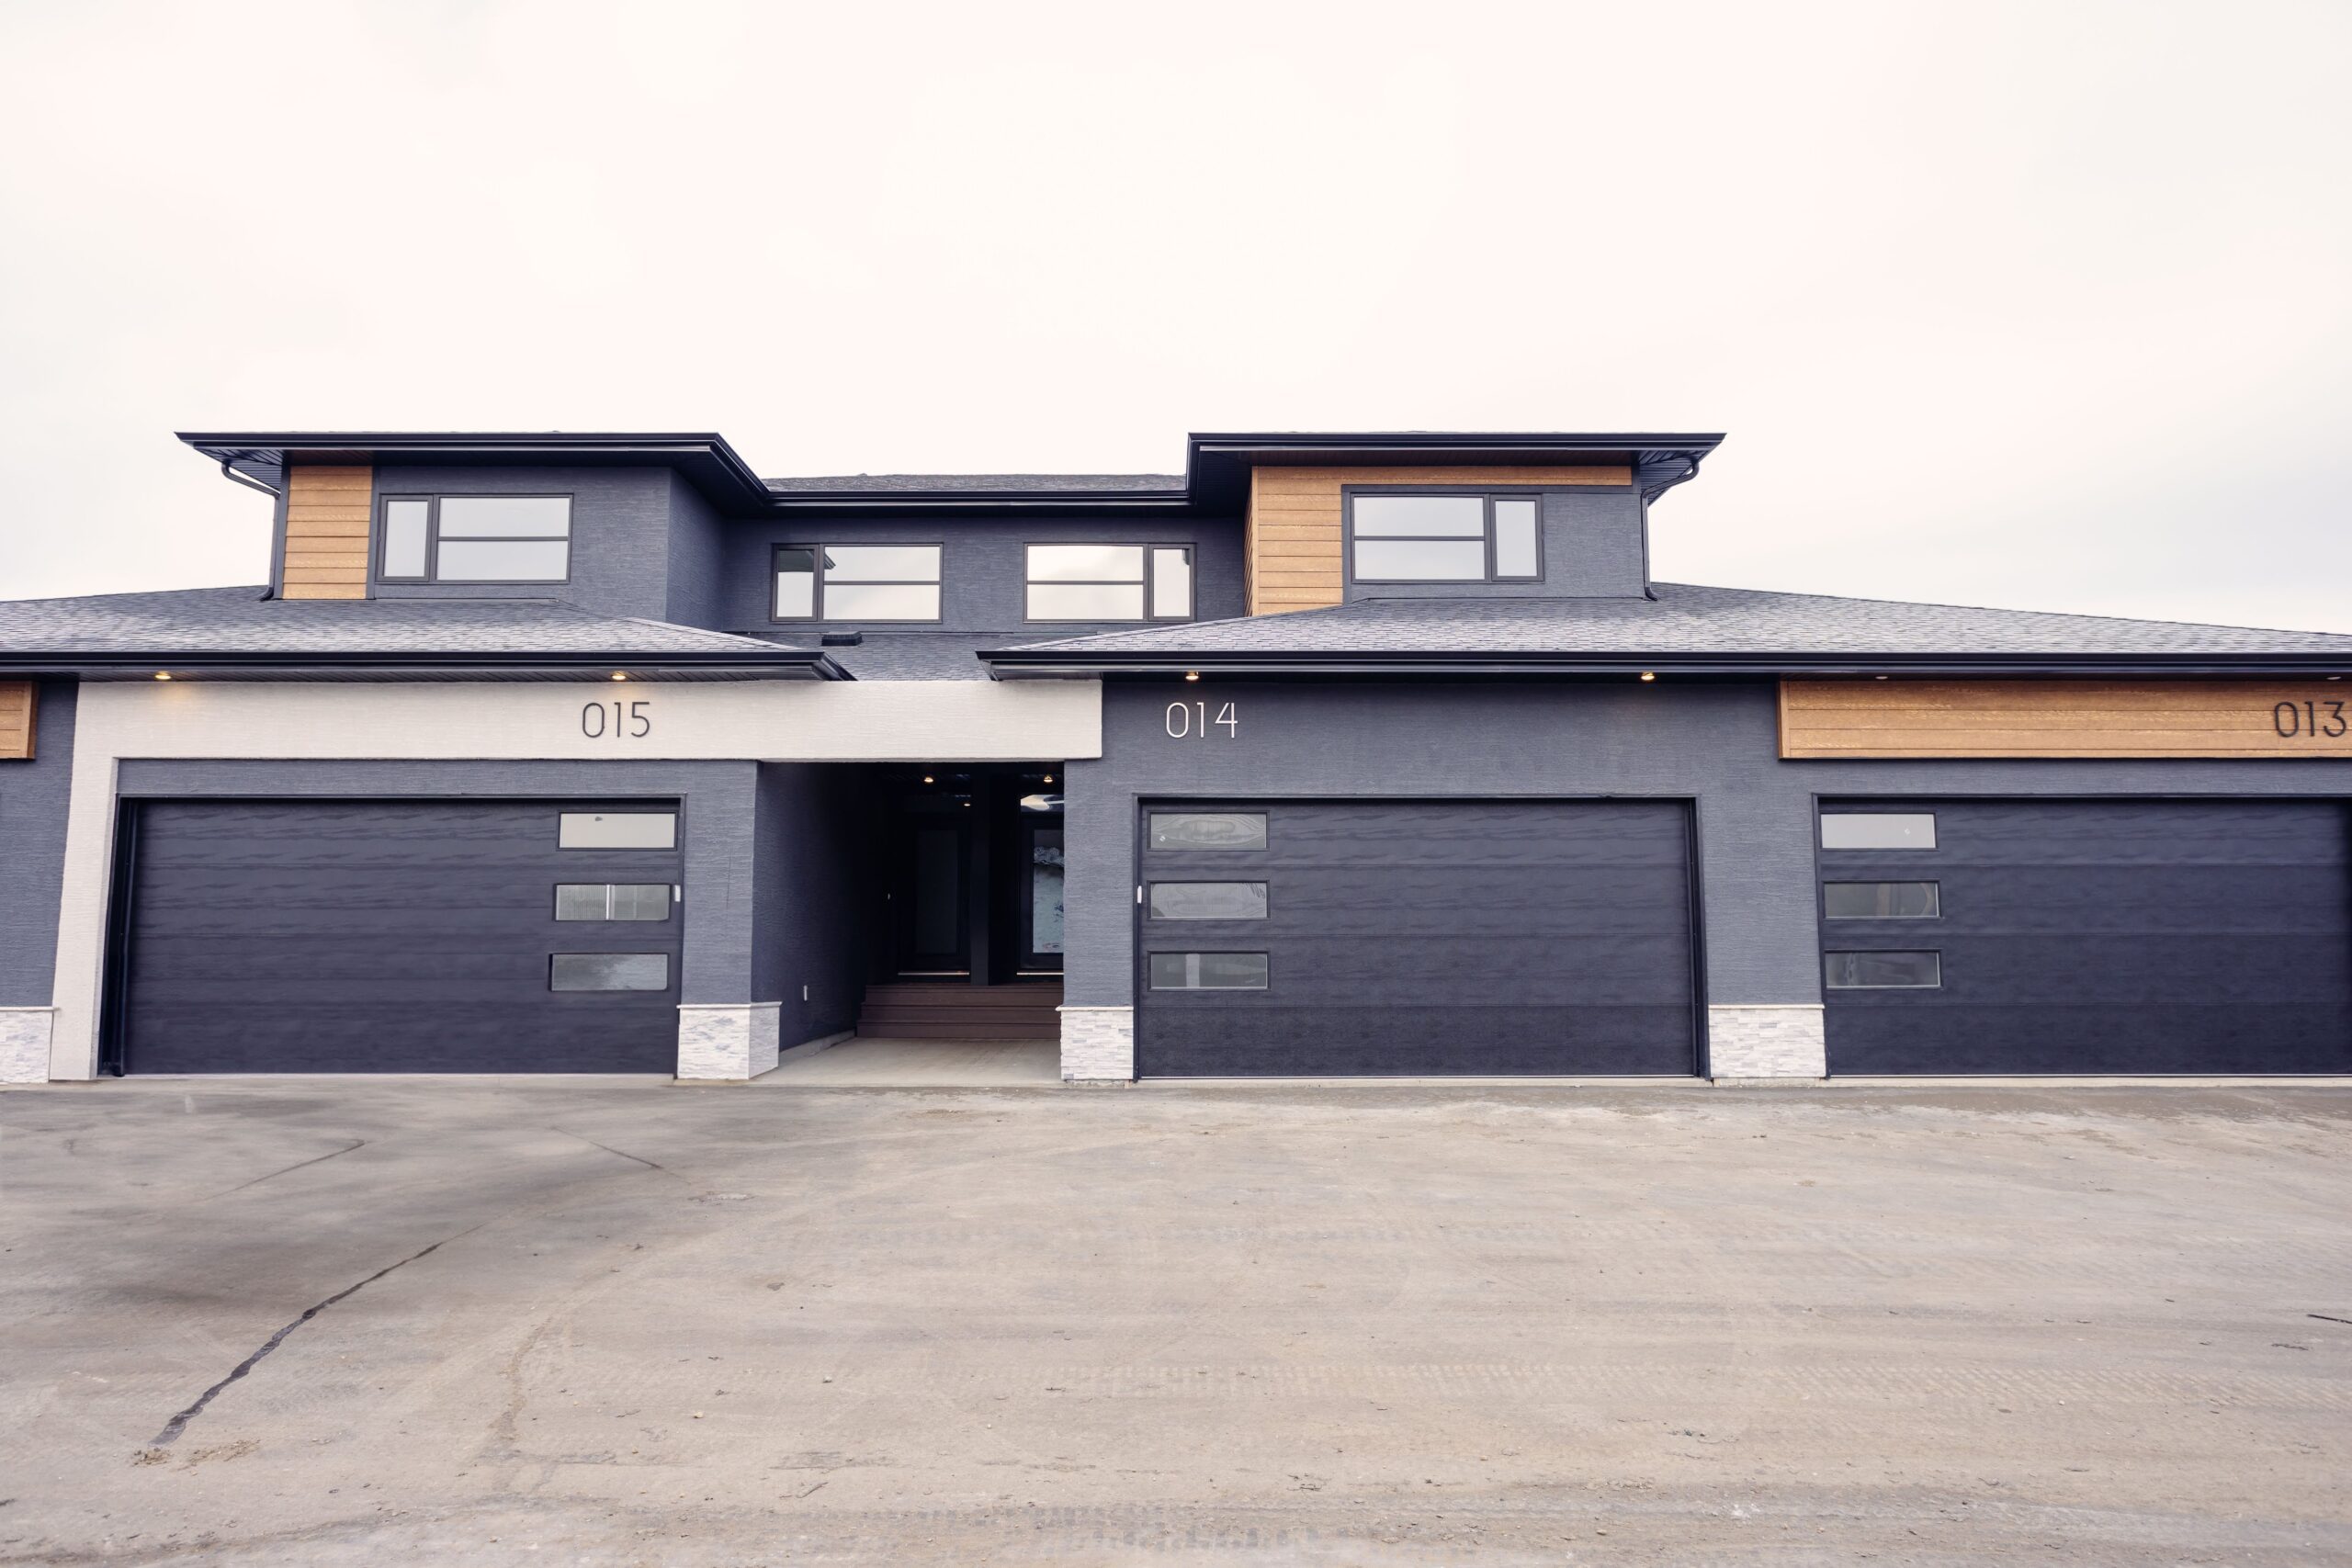 A house with garage doors.